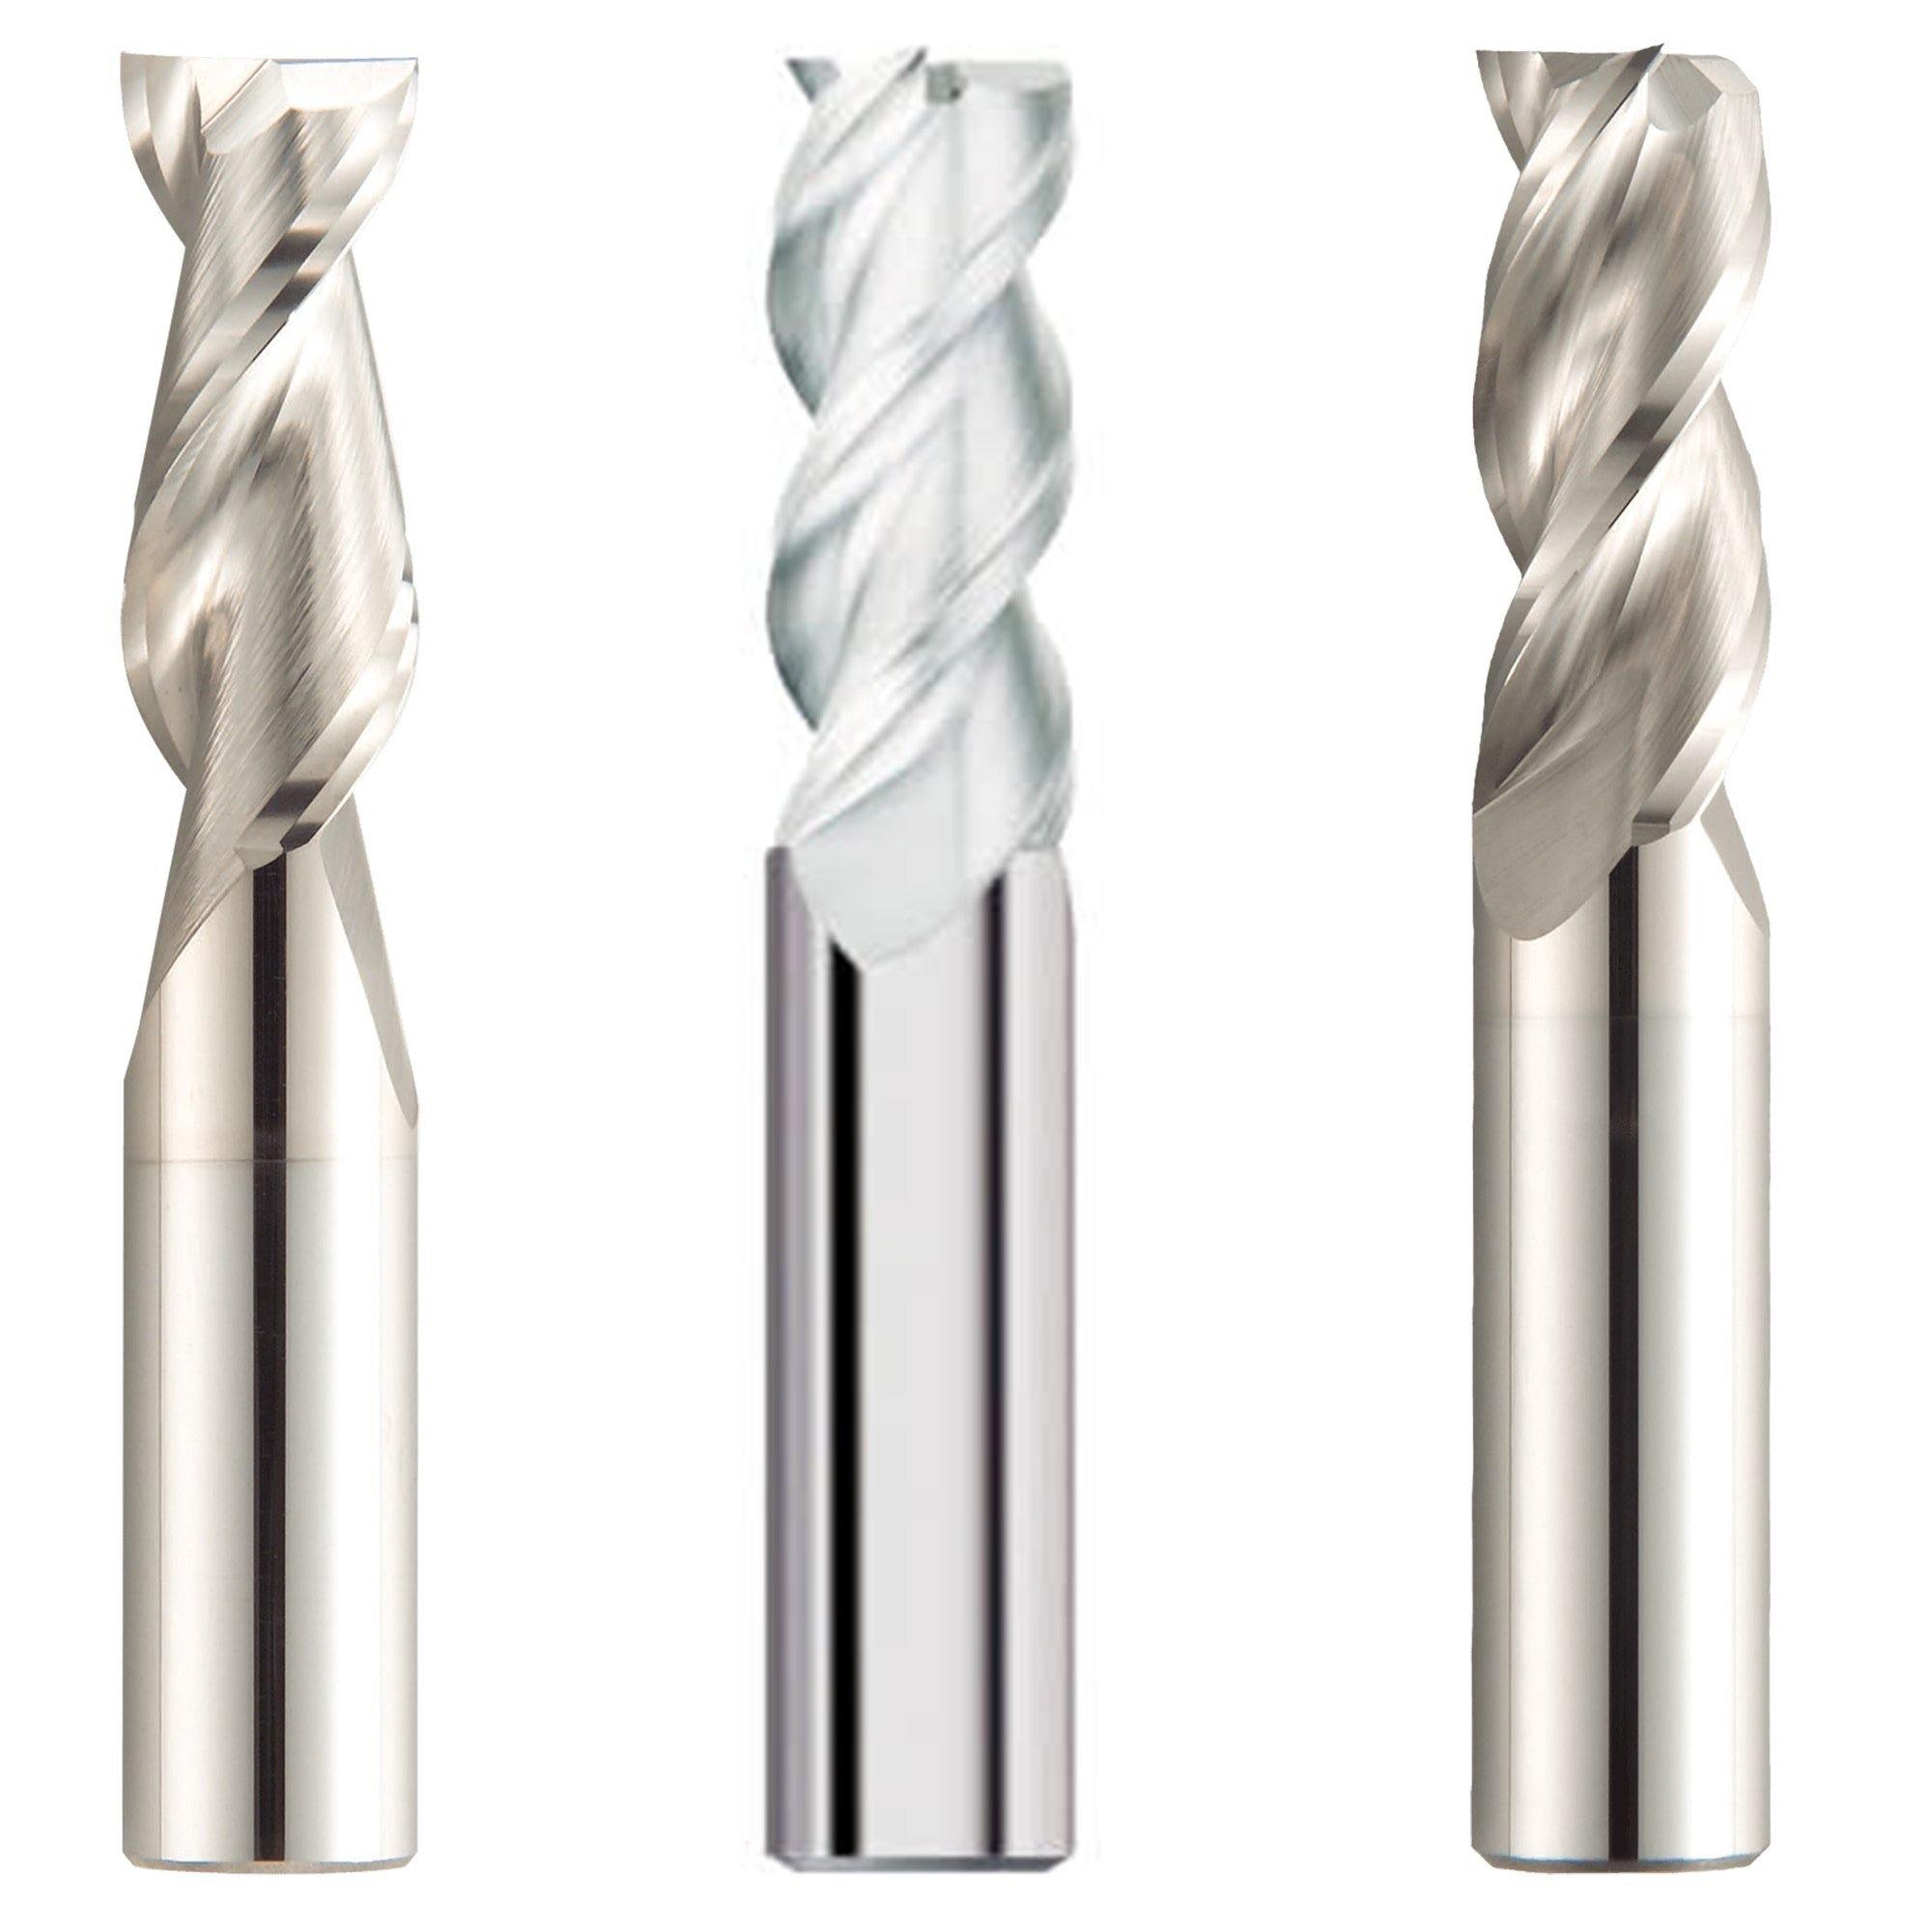 (3 Pack) 5/8" x 1-5/8" x 3-1/2" Aluminum HP Carbide End Mills - The End Mill Store 